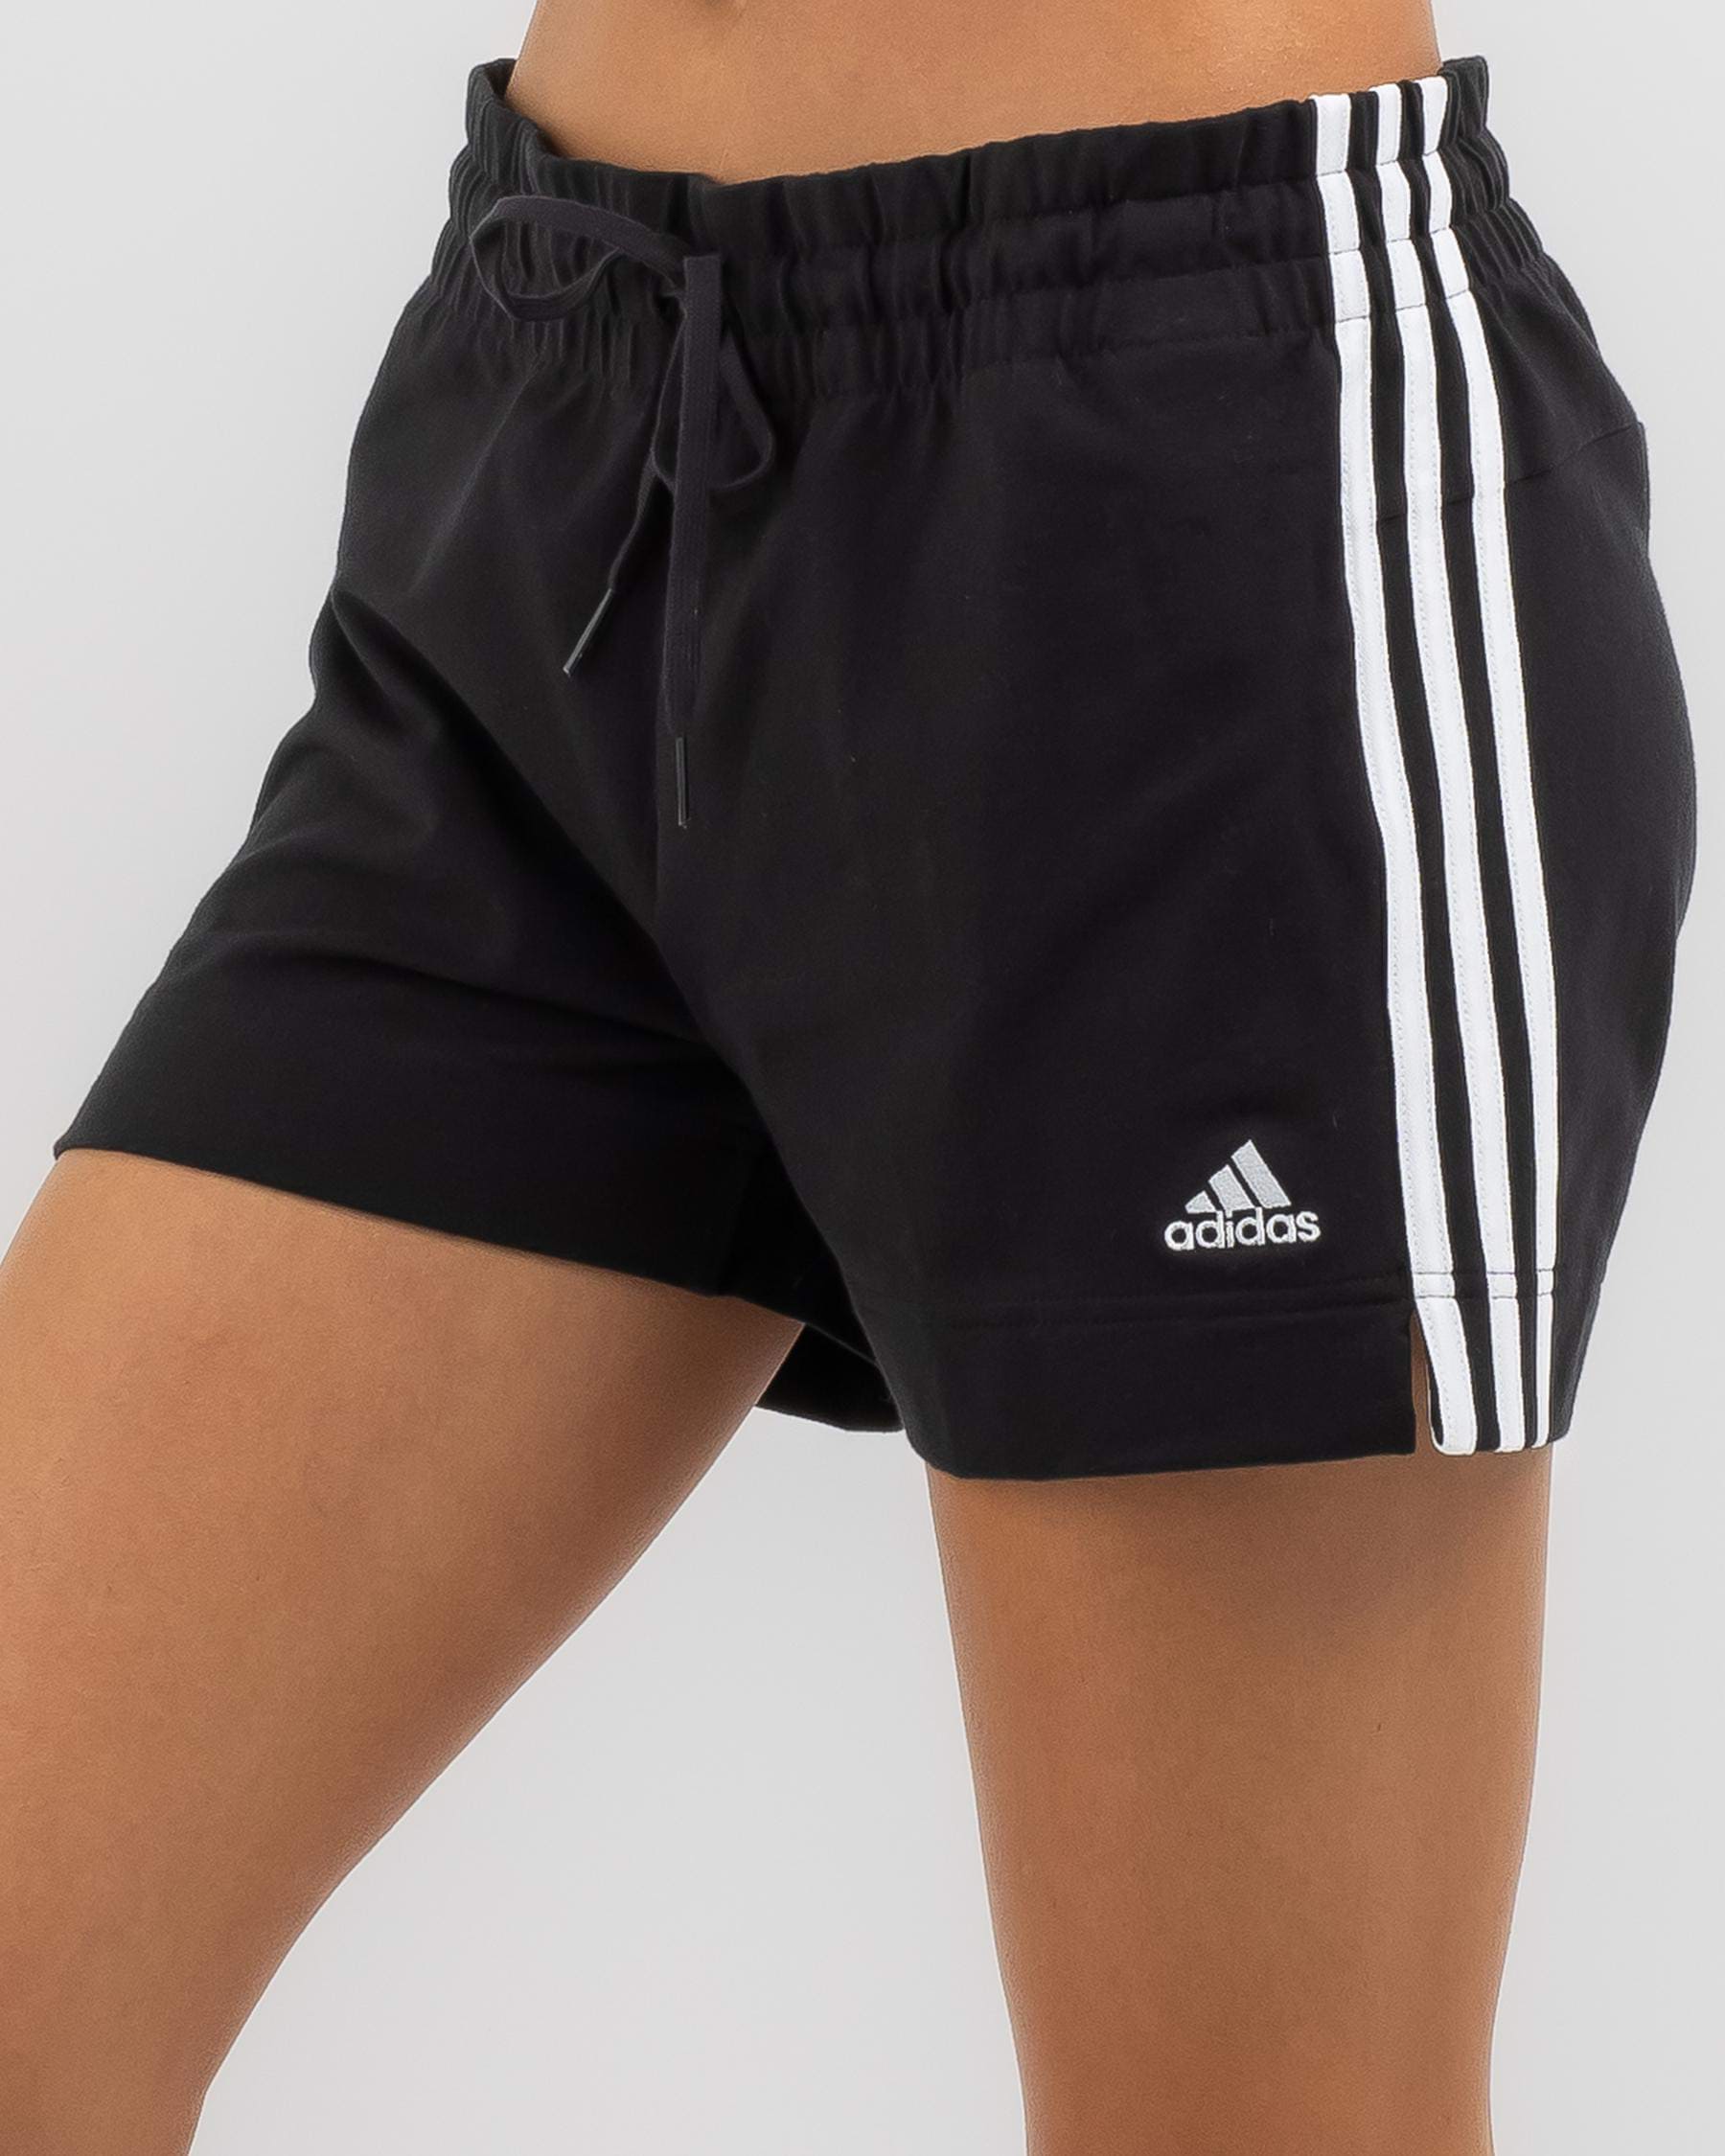 Adidas Essentials 3 Stripe Shorts In Black/white - Fast Shipping & Easy ...